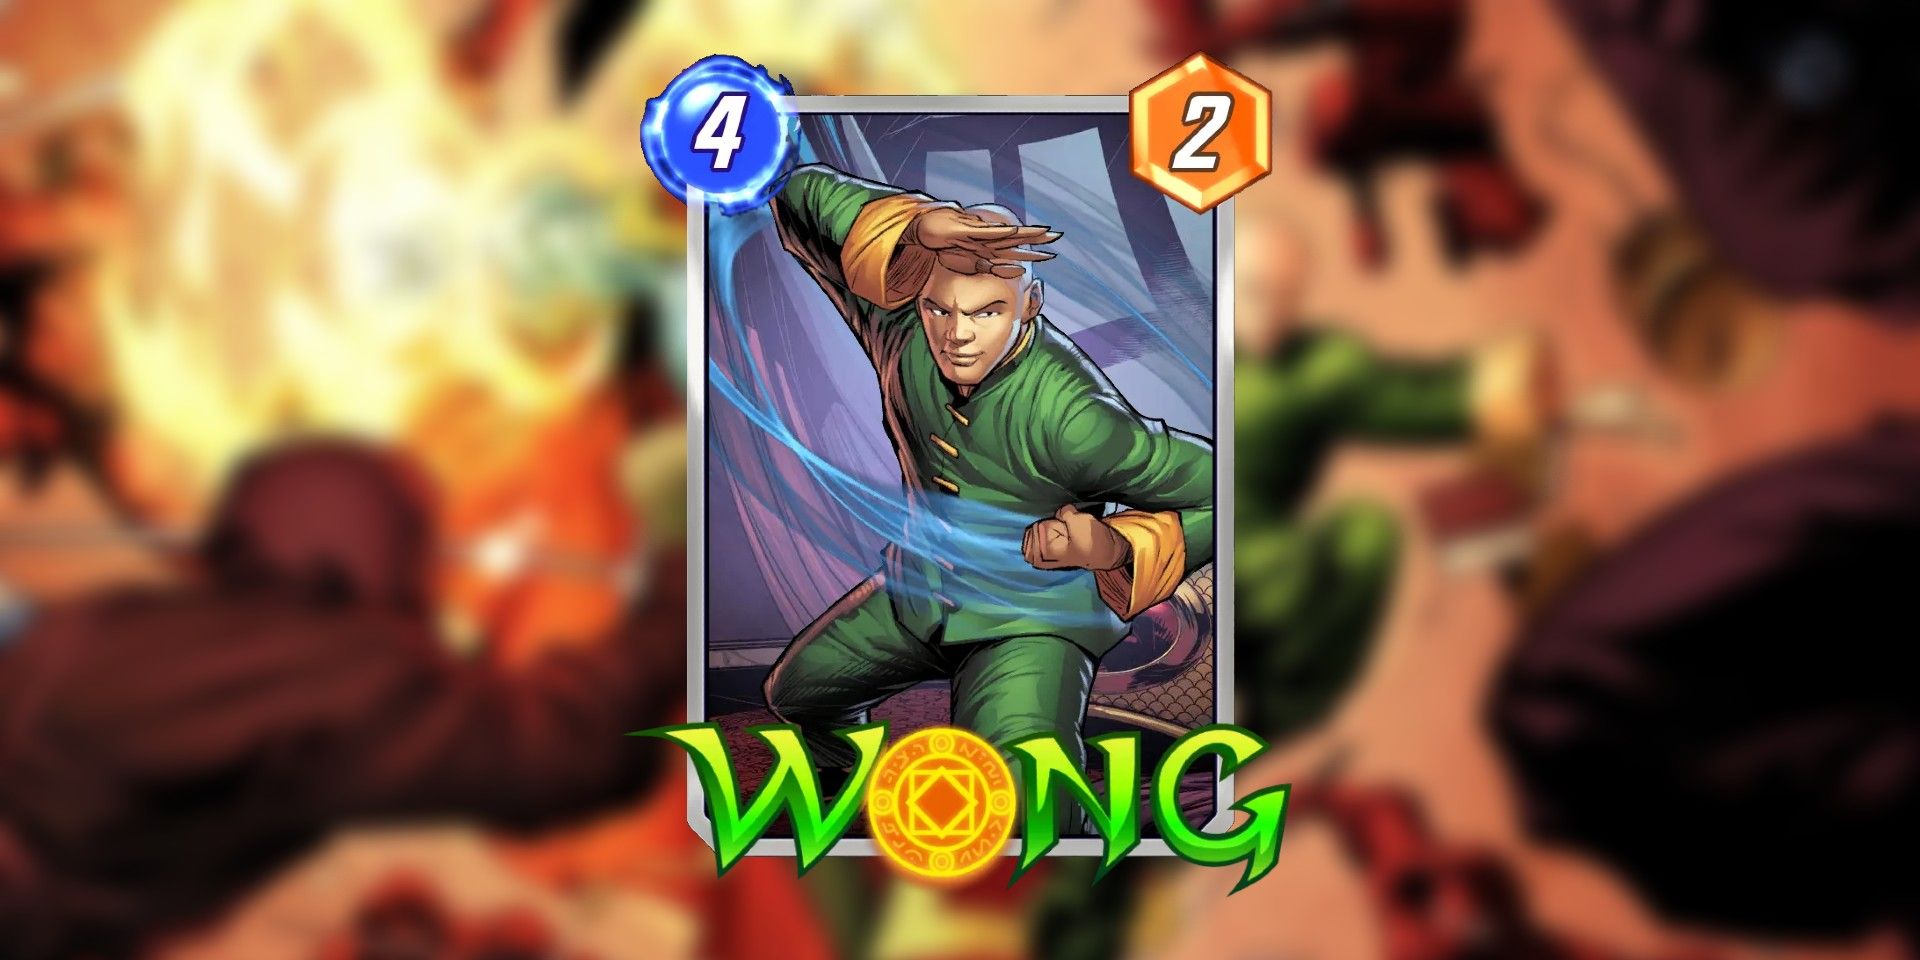 Marvel SNAP: Wong Deck Guide (Tips, Cards, & Strategies)